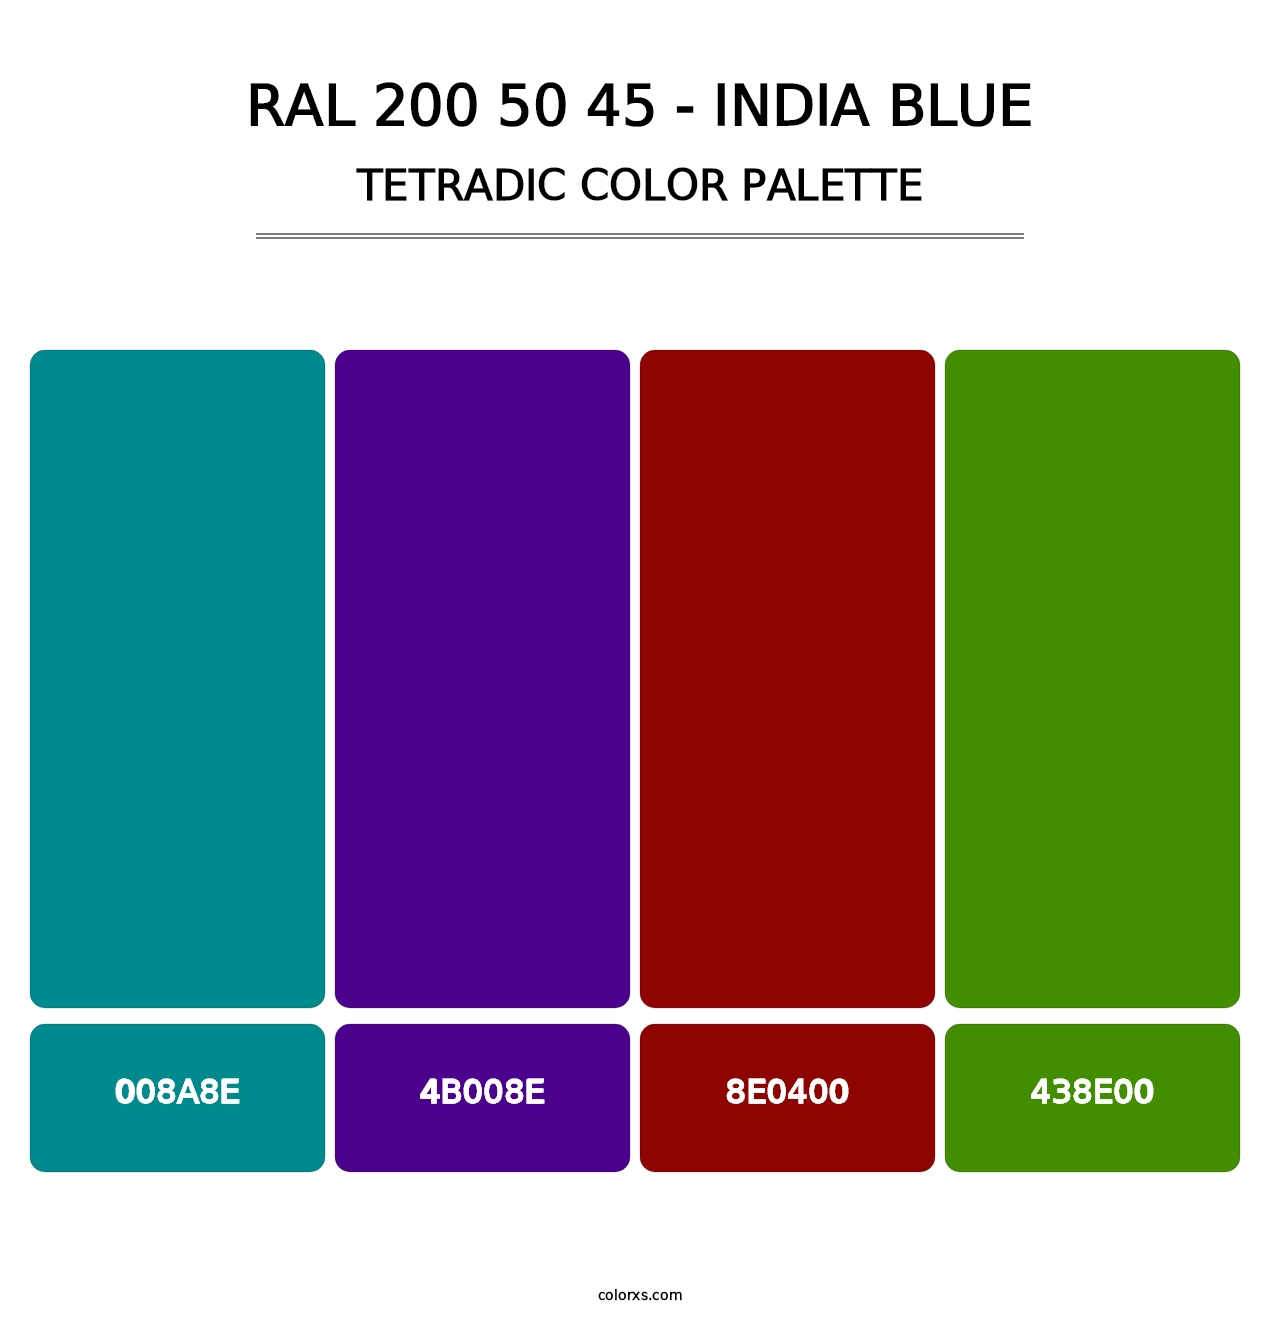 RAL 200 50 45 - India Blue - Tetradic Color Palette